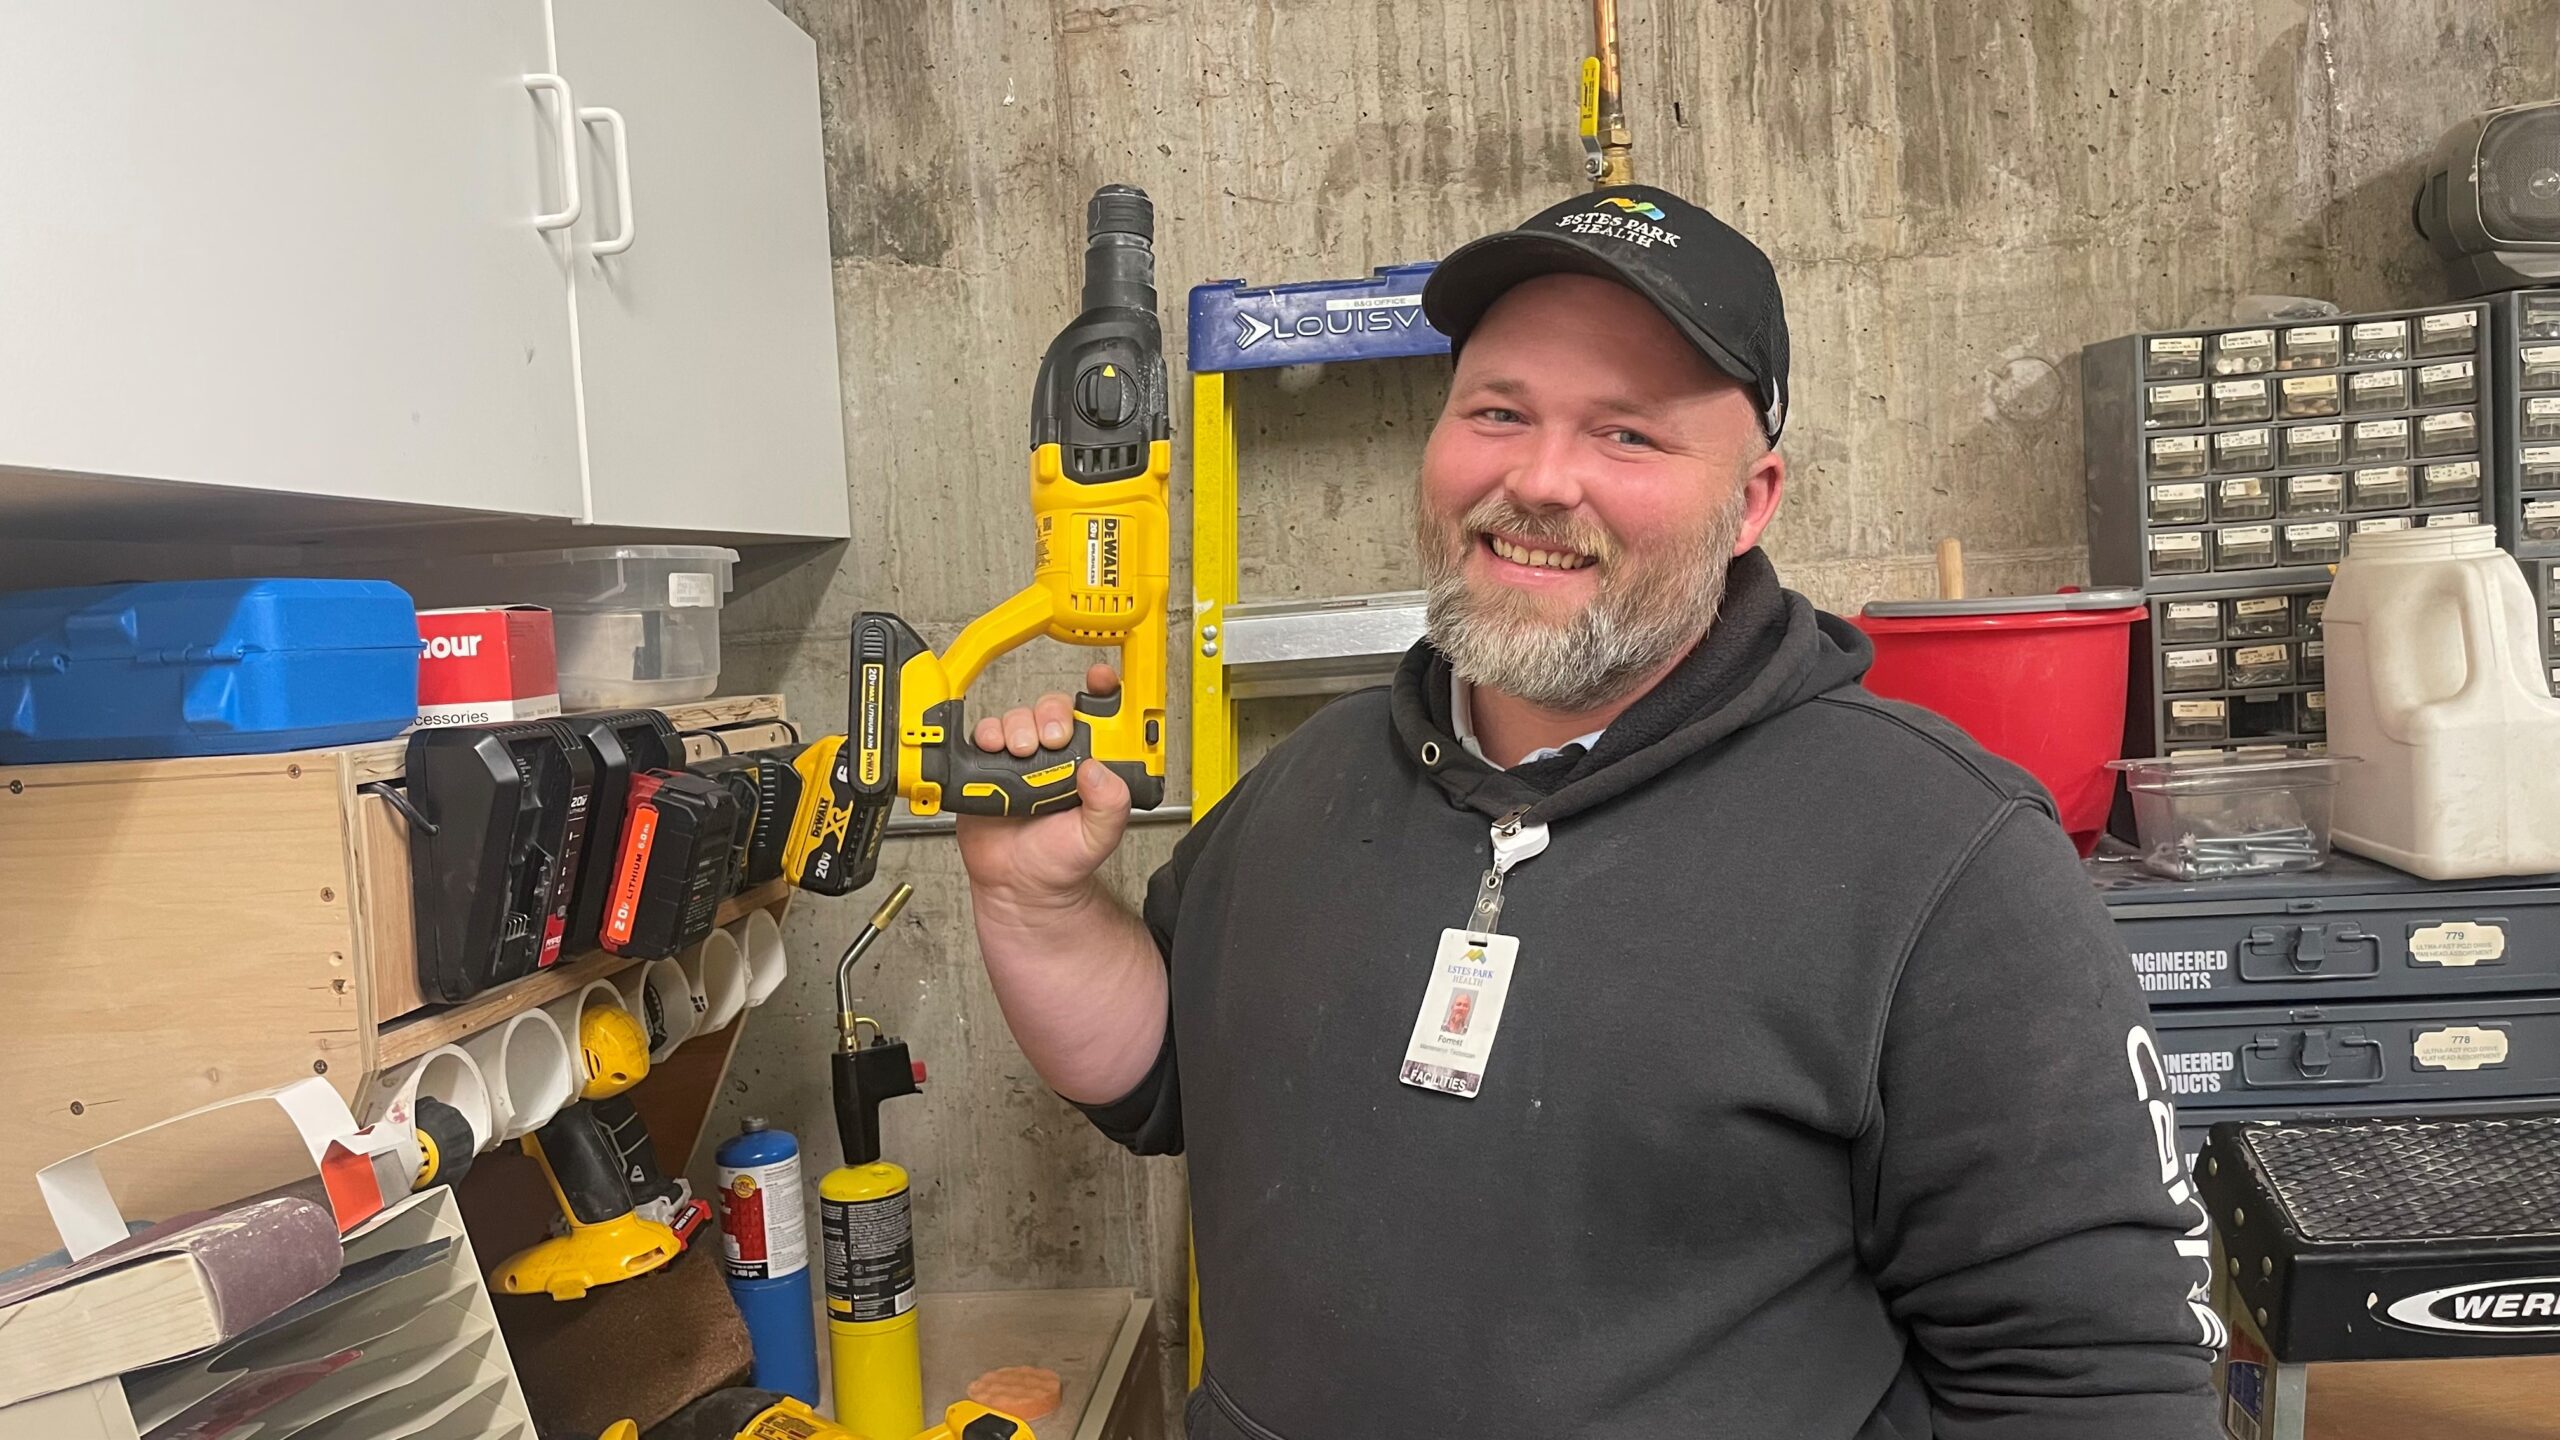 A man wearing a black hoodie and cap smiles while holding a yellow cordless drill in a workshop setting. Various tools and equipment are visible in the background.